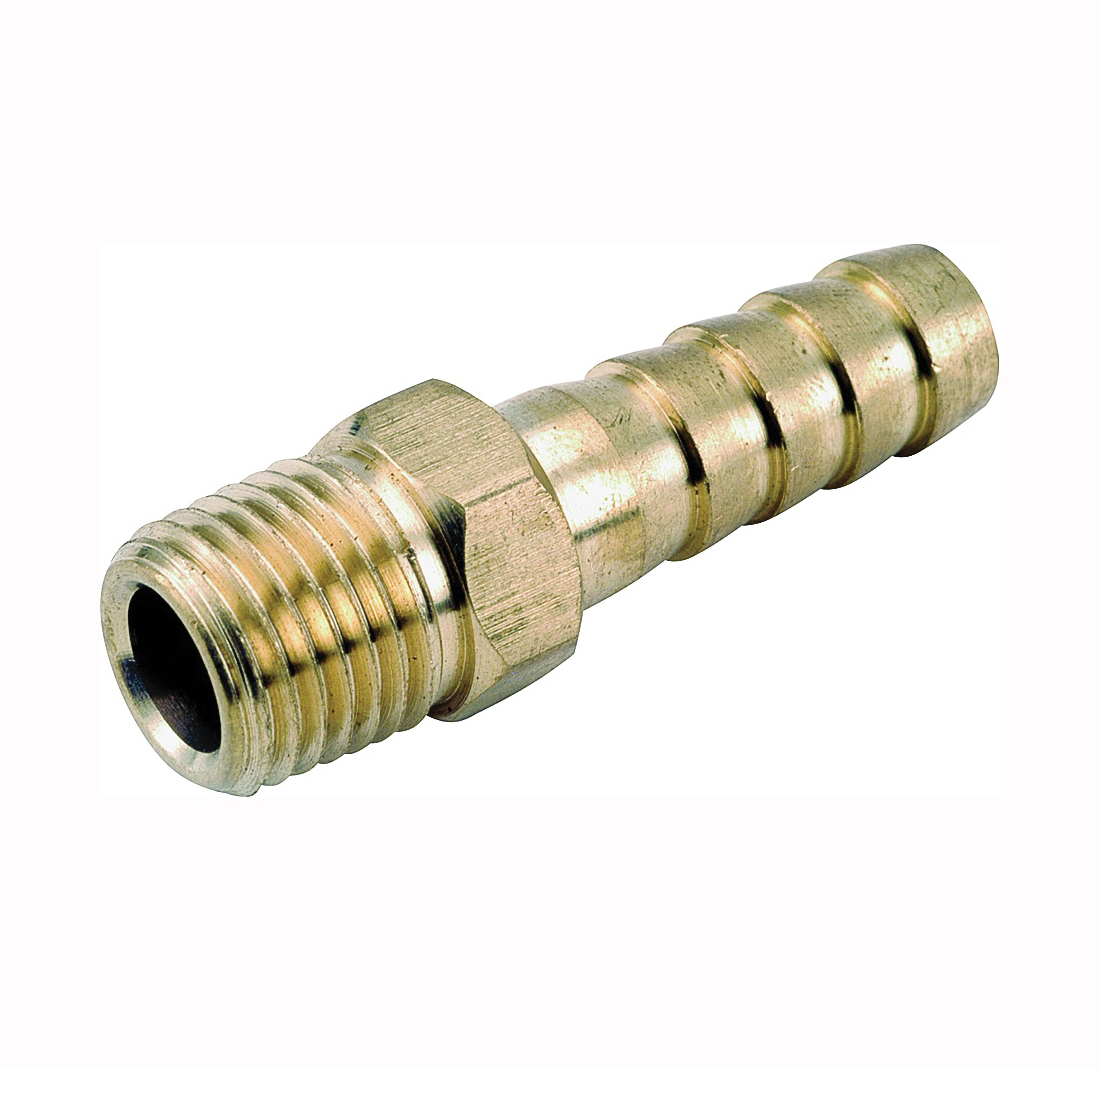 Anderson Metals 129 Series 757001-1008 Hose Adapter, 5/8 in, Barb, 1/2 in, MPT, Brass - 1